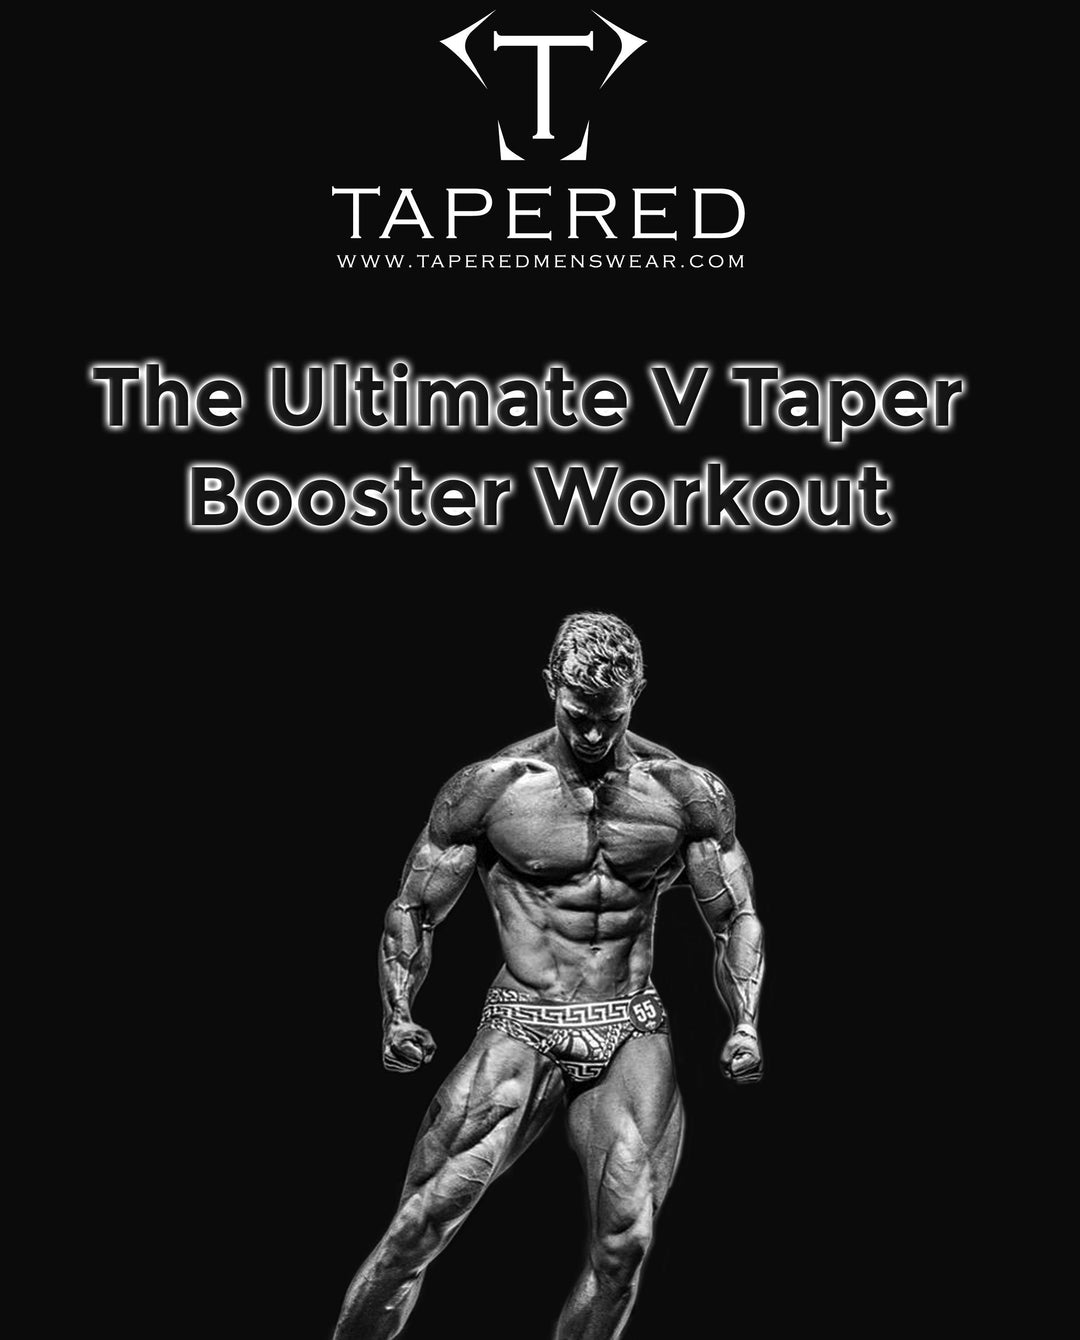 The Ultimate V-Taper Booster Workout